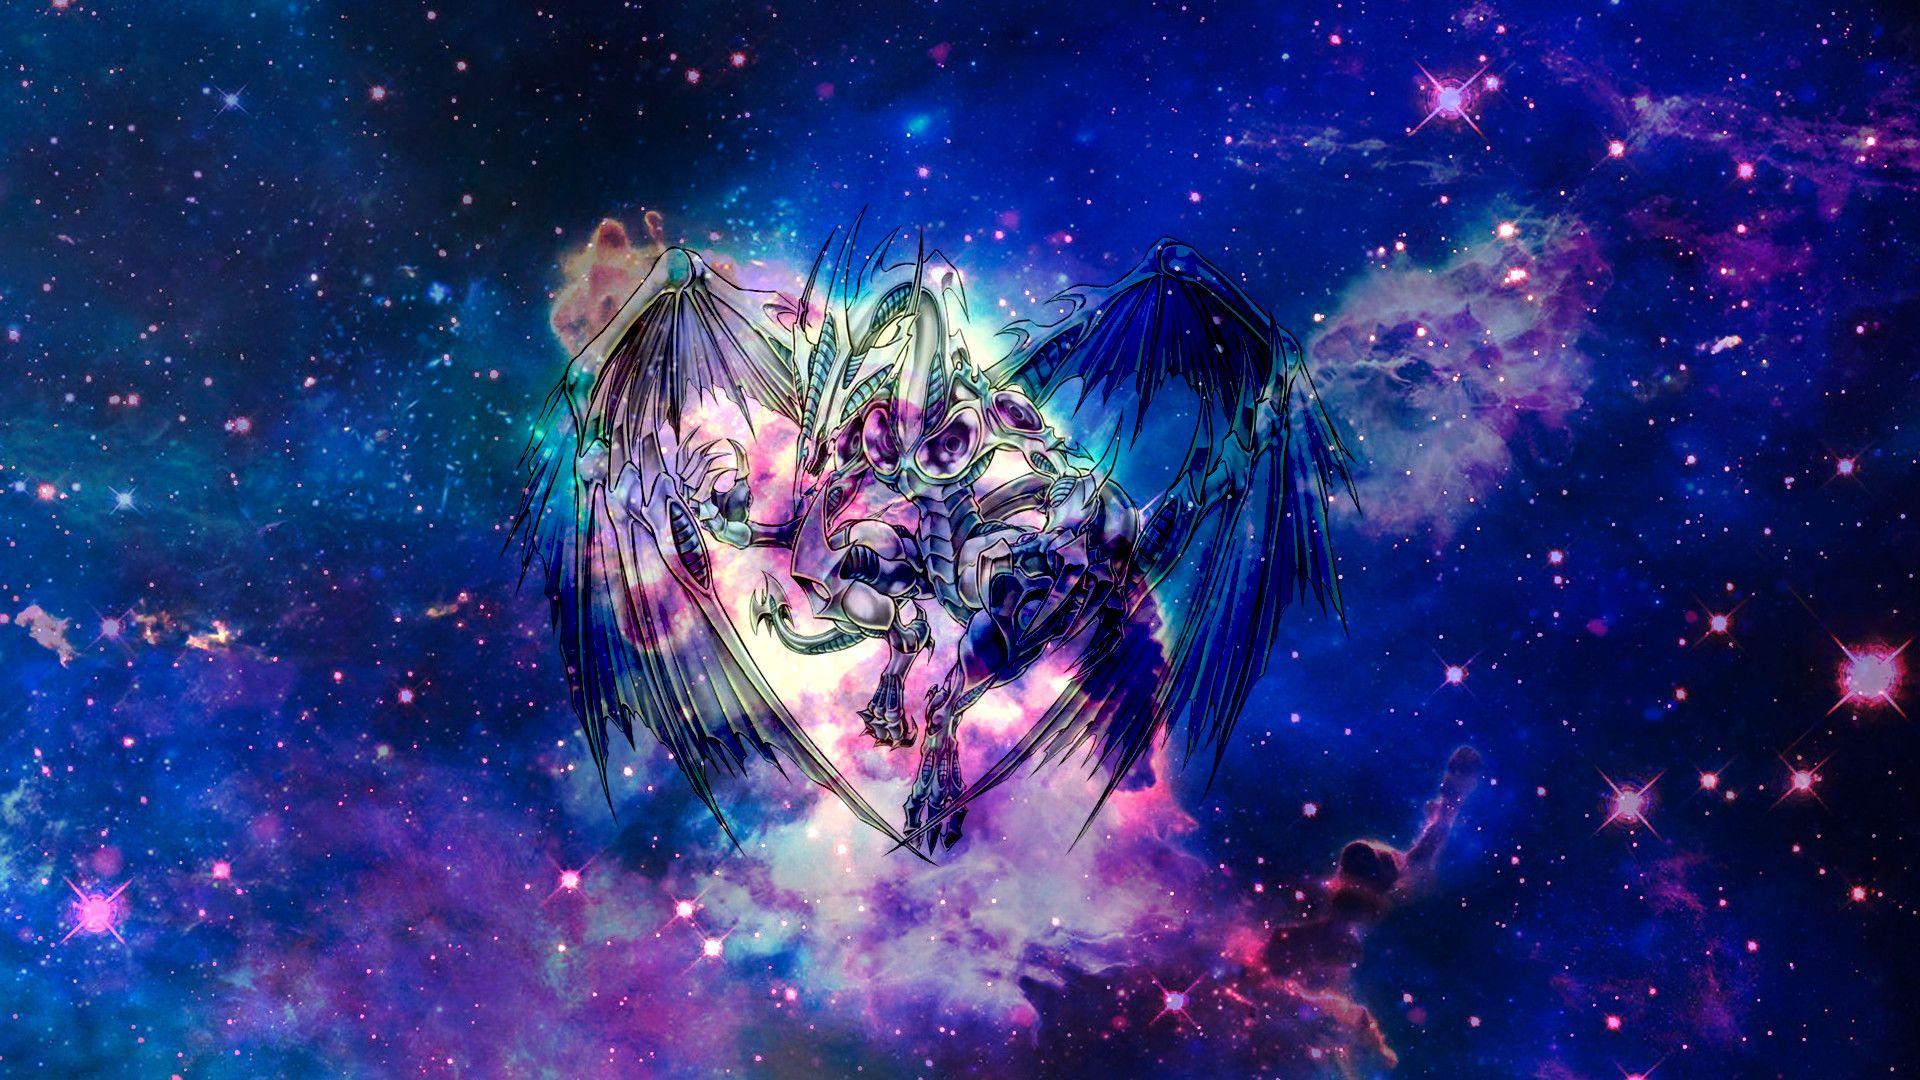 Stardust Dragon Wallpapers Mobile ✓ Labzada Wallpapers.